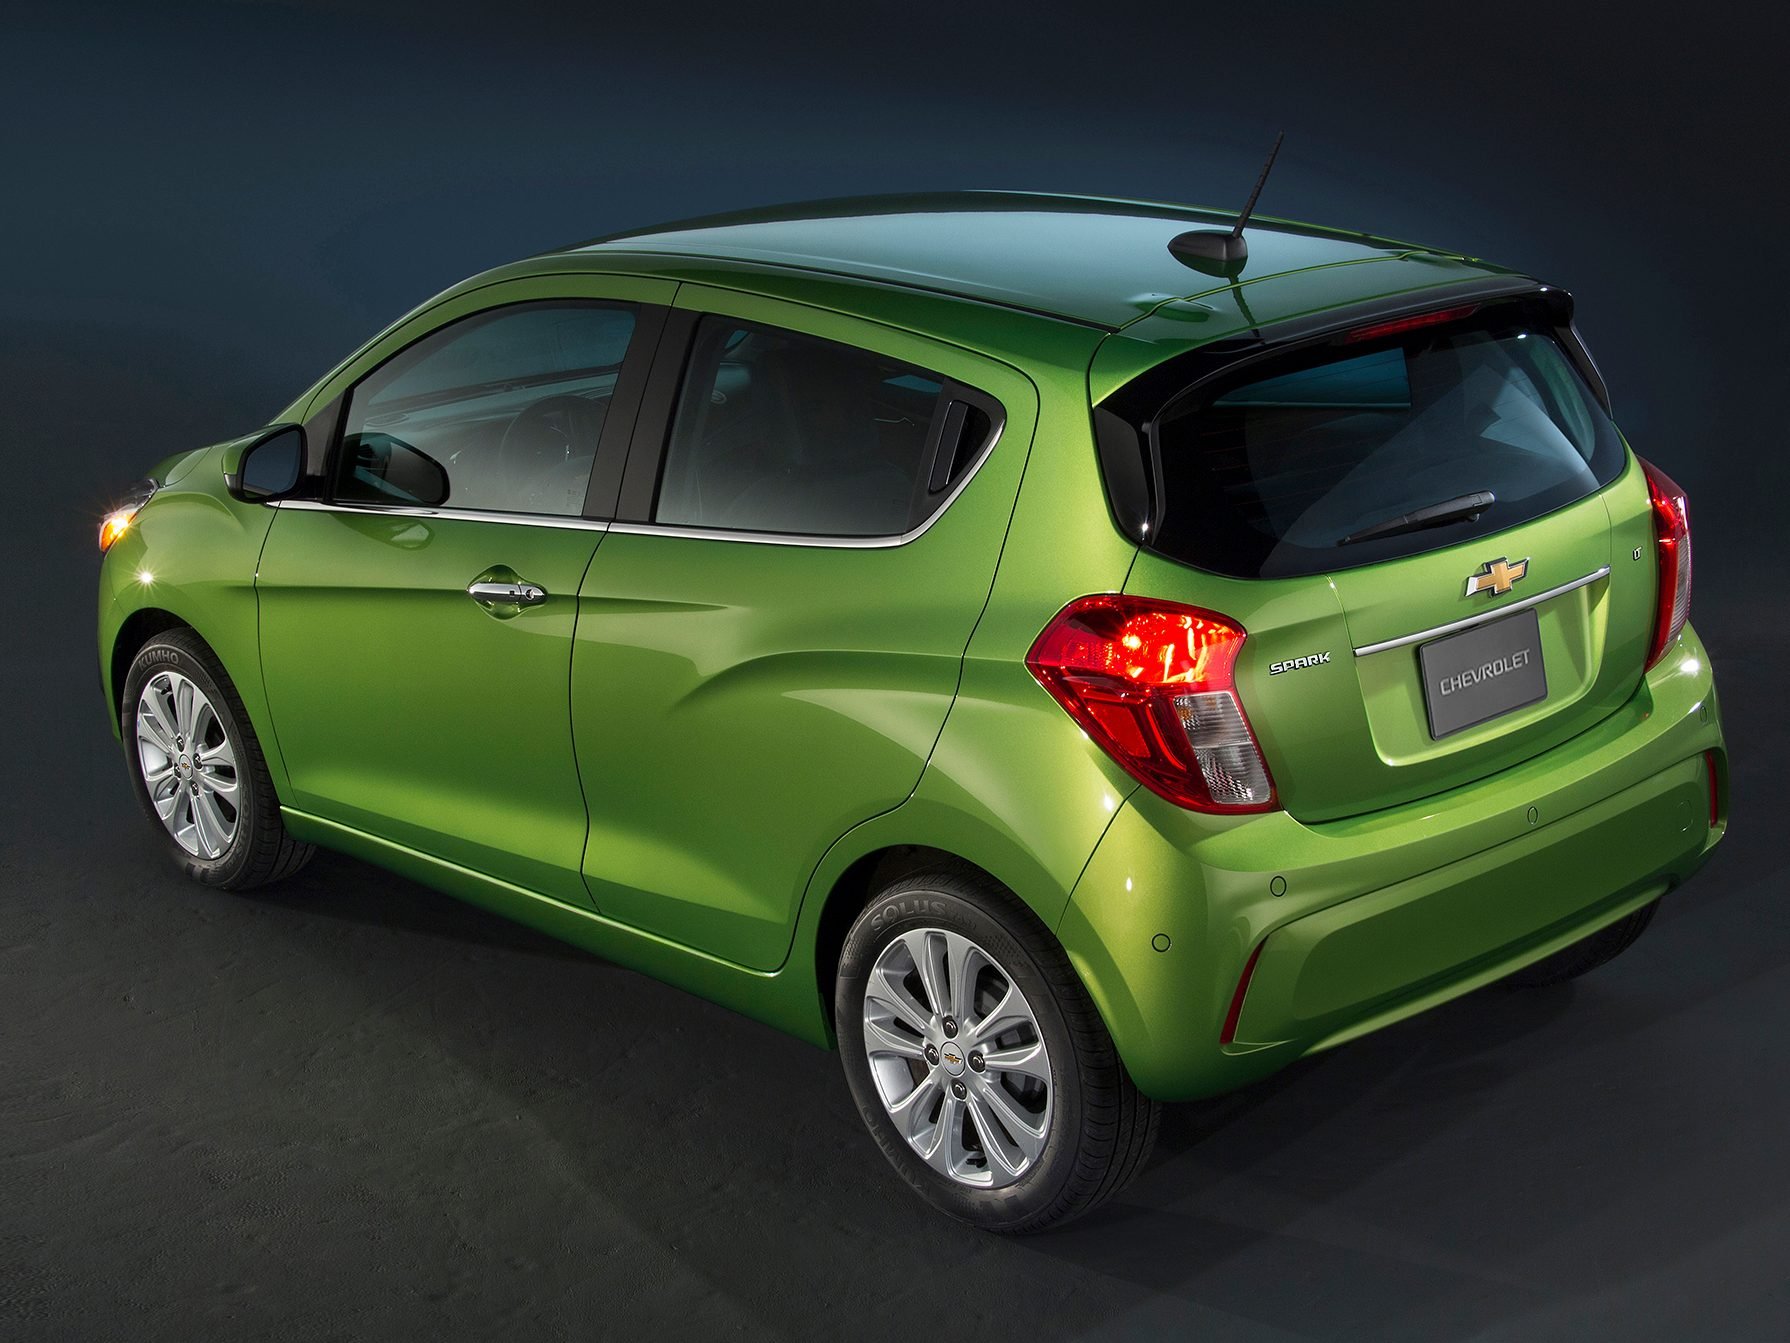 1. The 2016 Chevrolet Spark has more safety features.